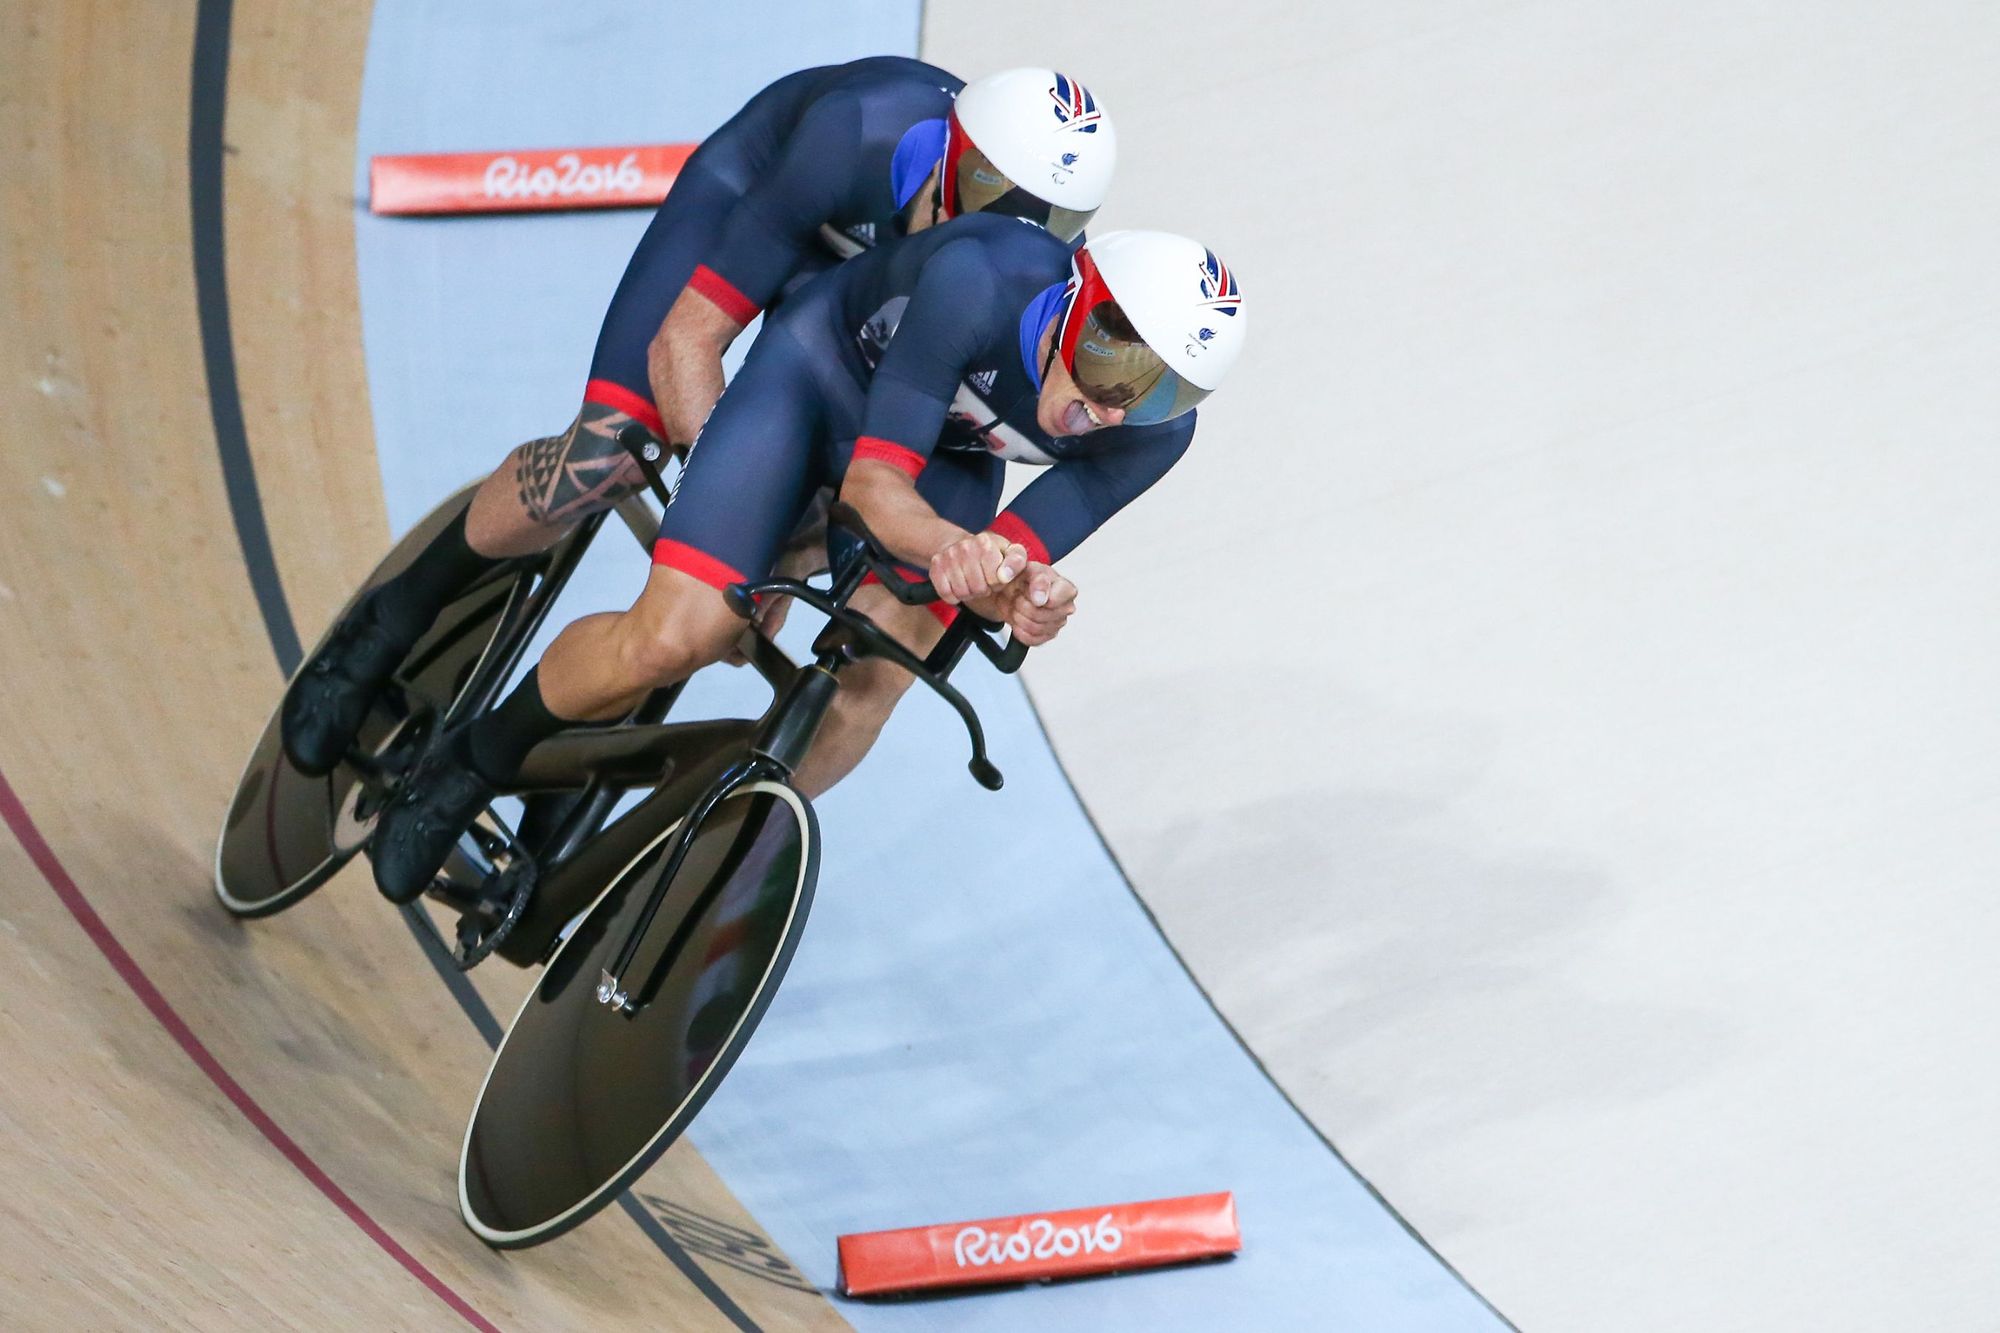 Steve Bate is a New Zealand–British Paralympic cyclist, and was awarded an MBE in 2017. Photo: Spring PR